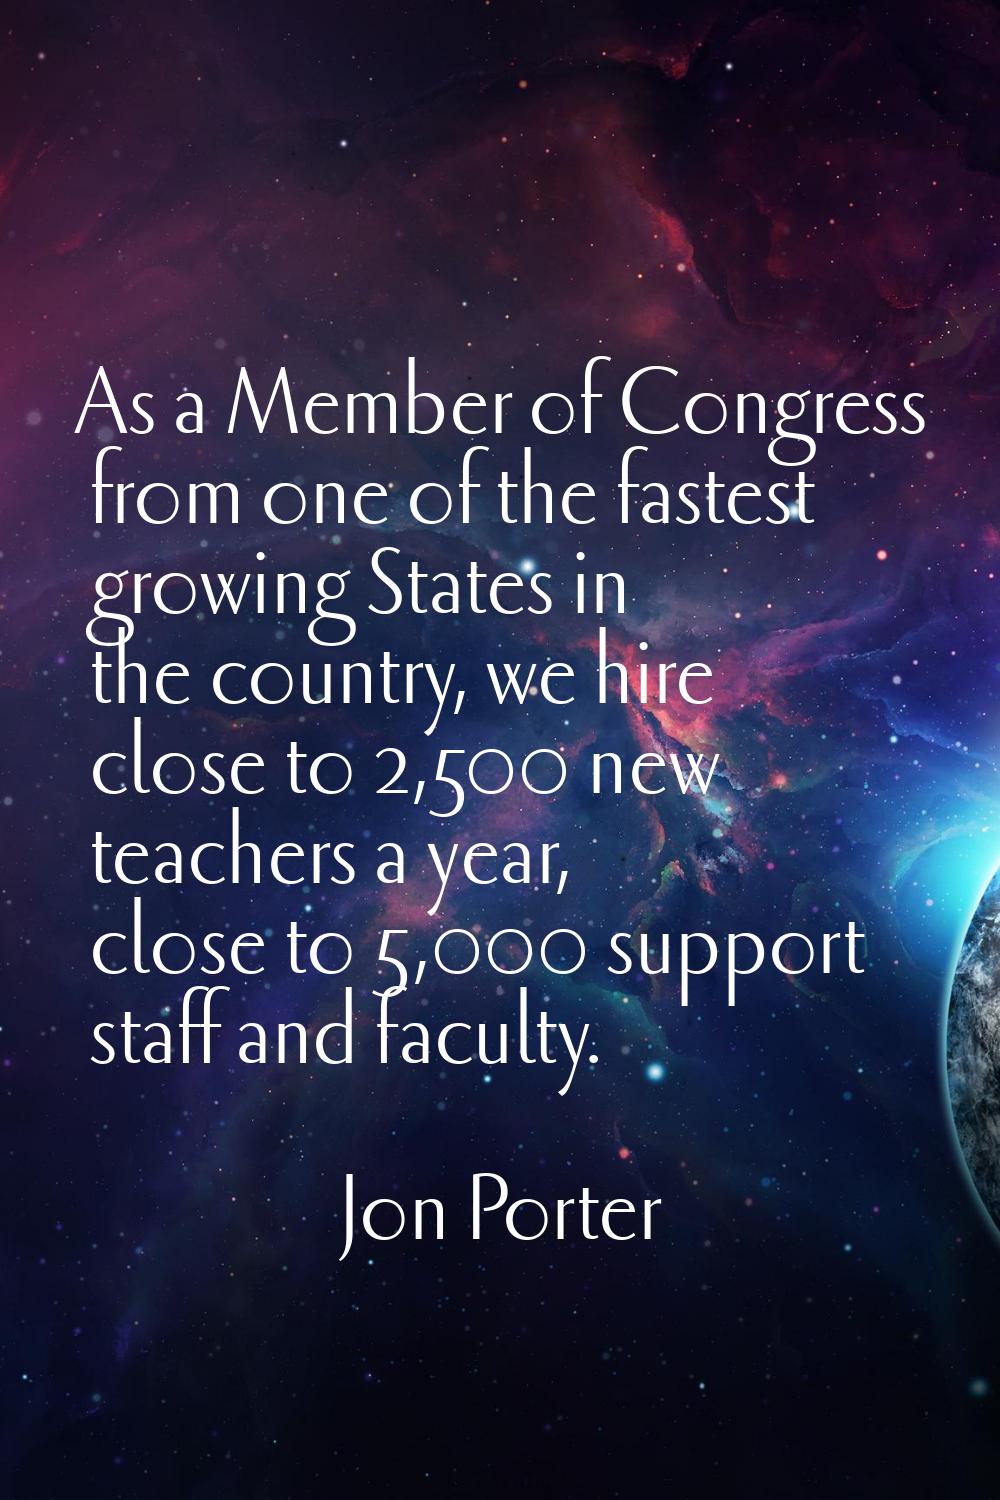 As a Member of Congress from one of the fastest growing States in the country, we hire close to 2,5